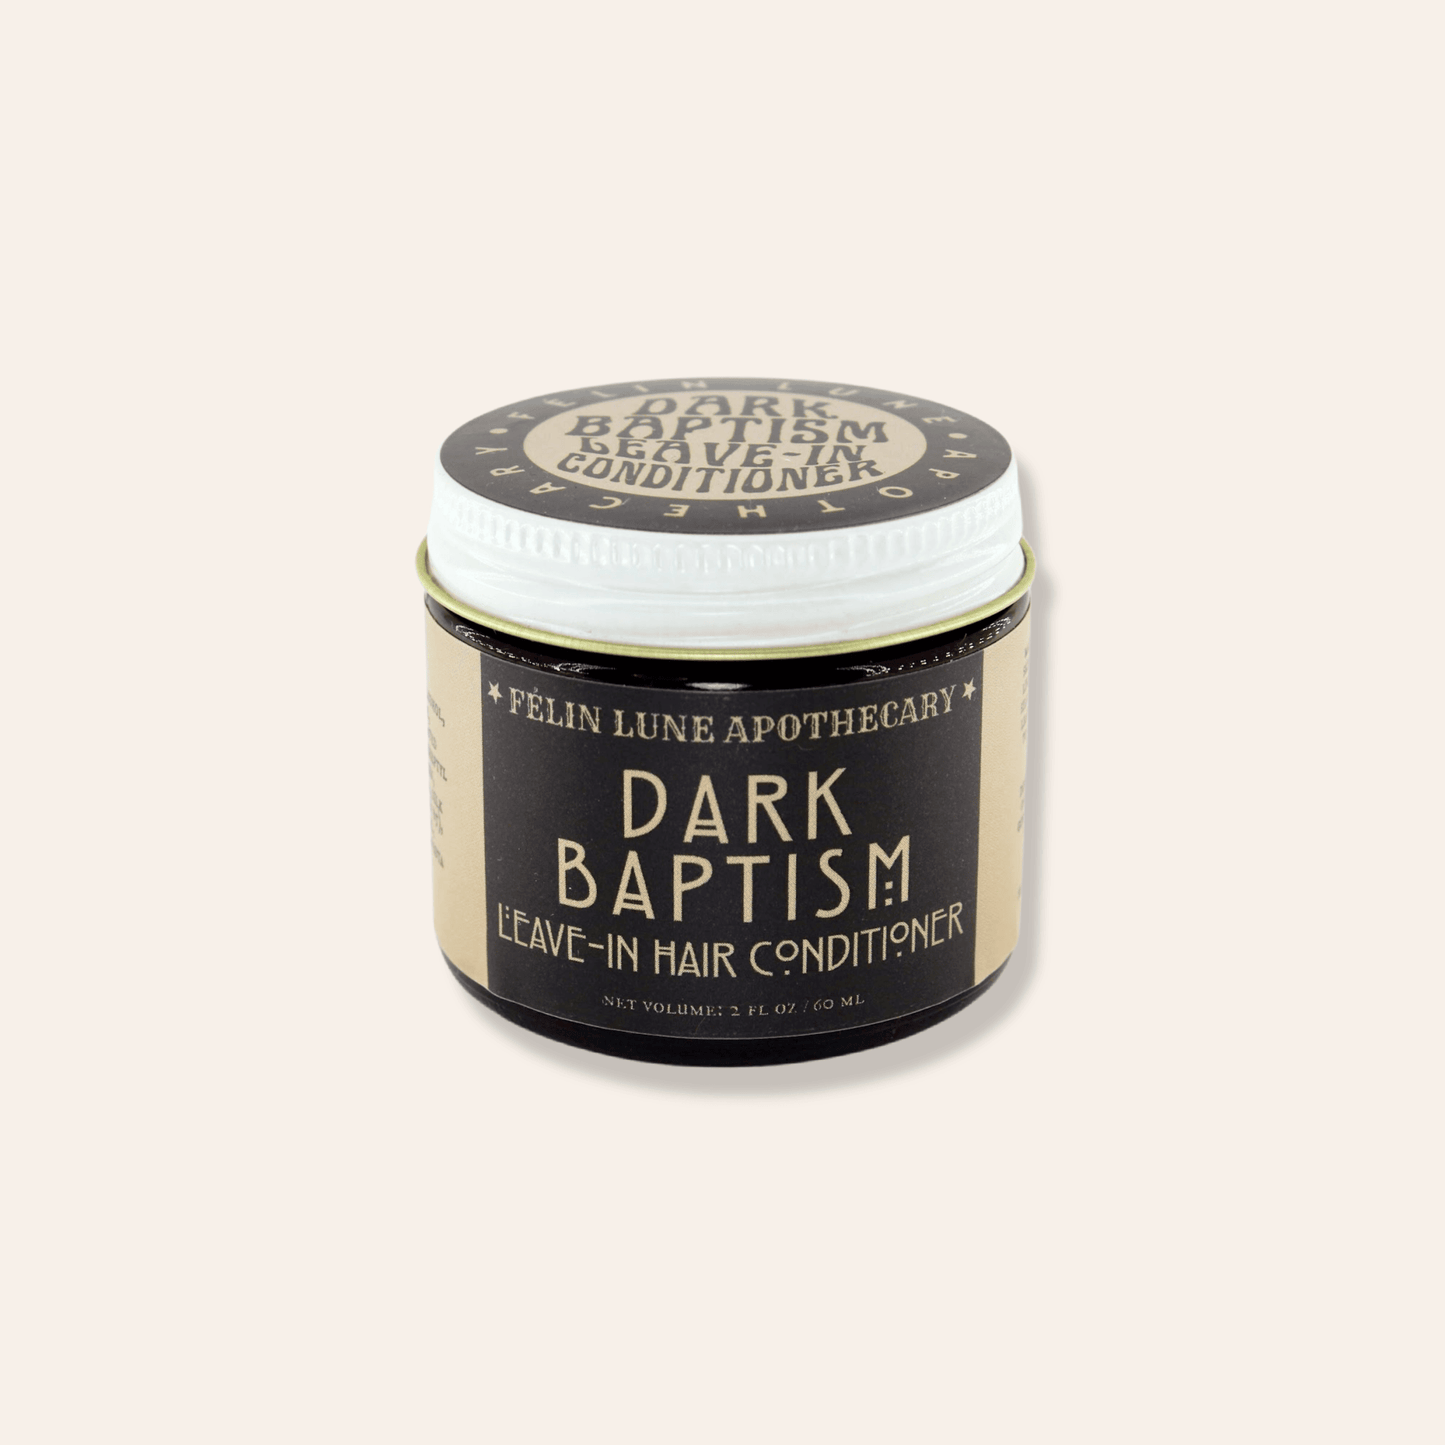 A jar of dark baptism leave in hair conditioner on a beige background.